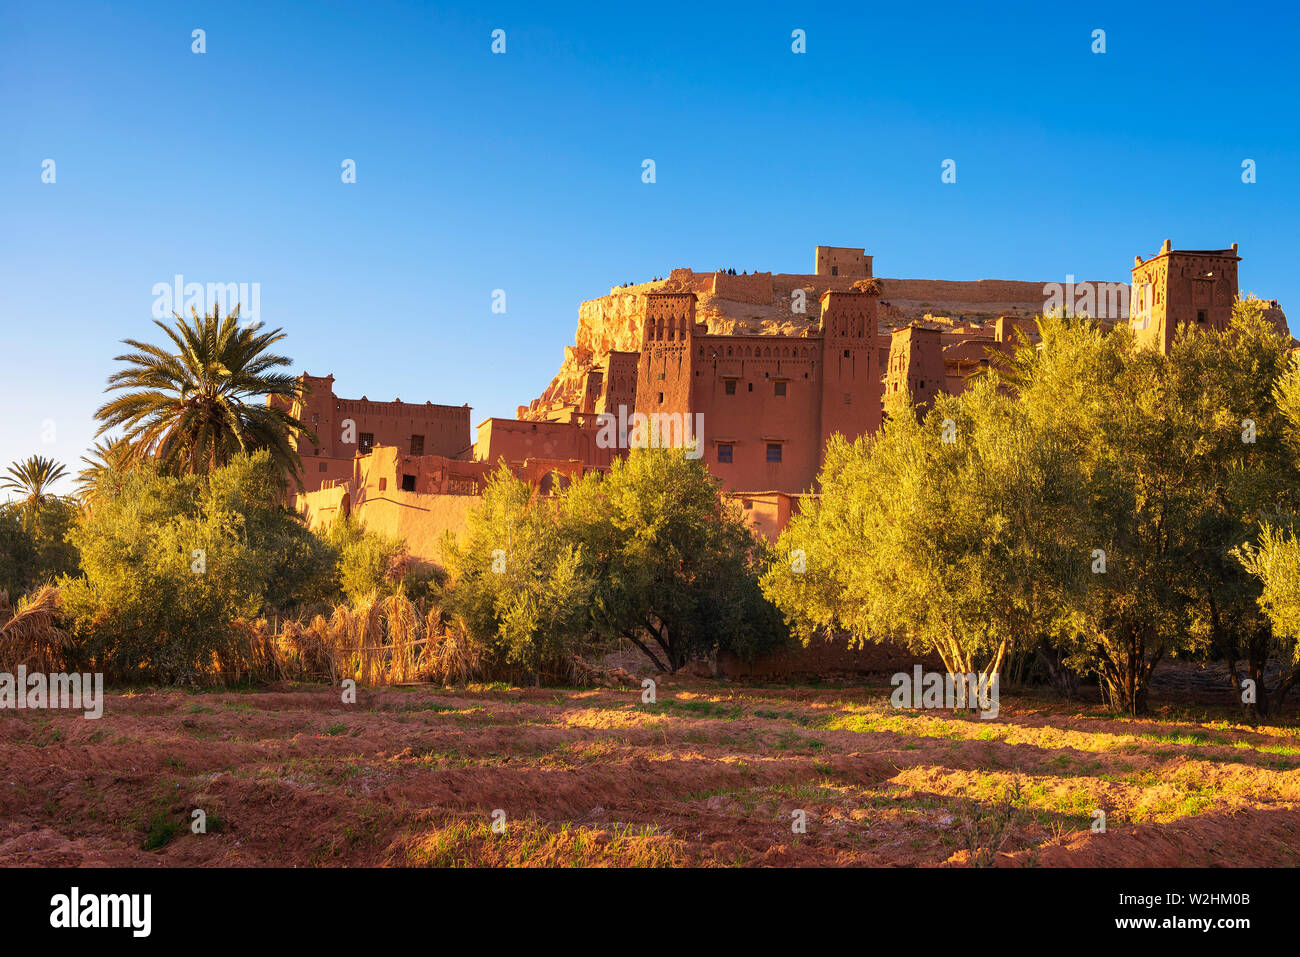 Ancient city of Ait Benhaddou in Morocco Stock Photo